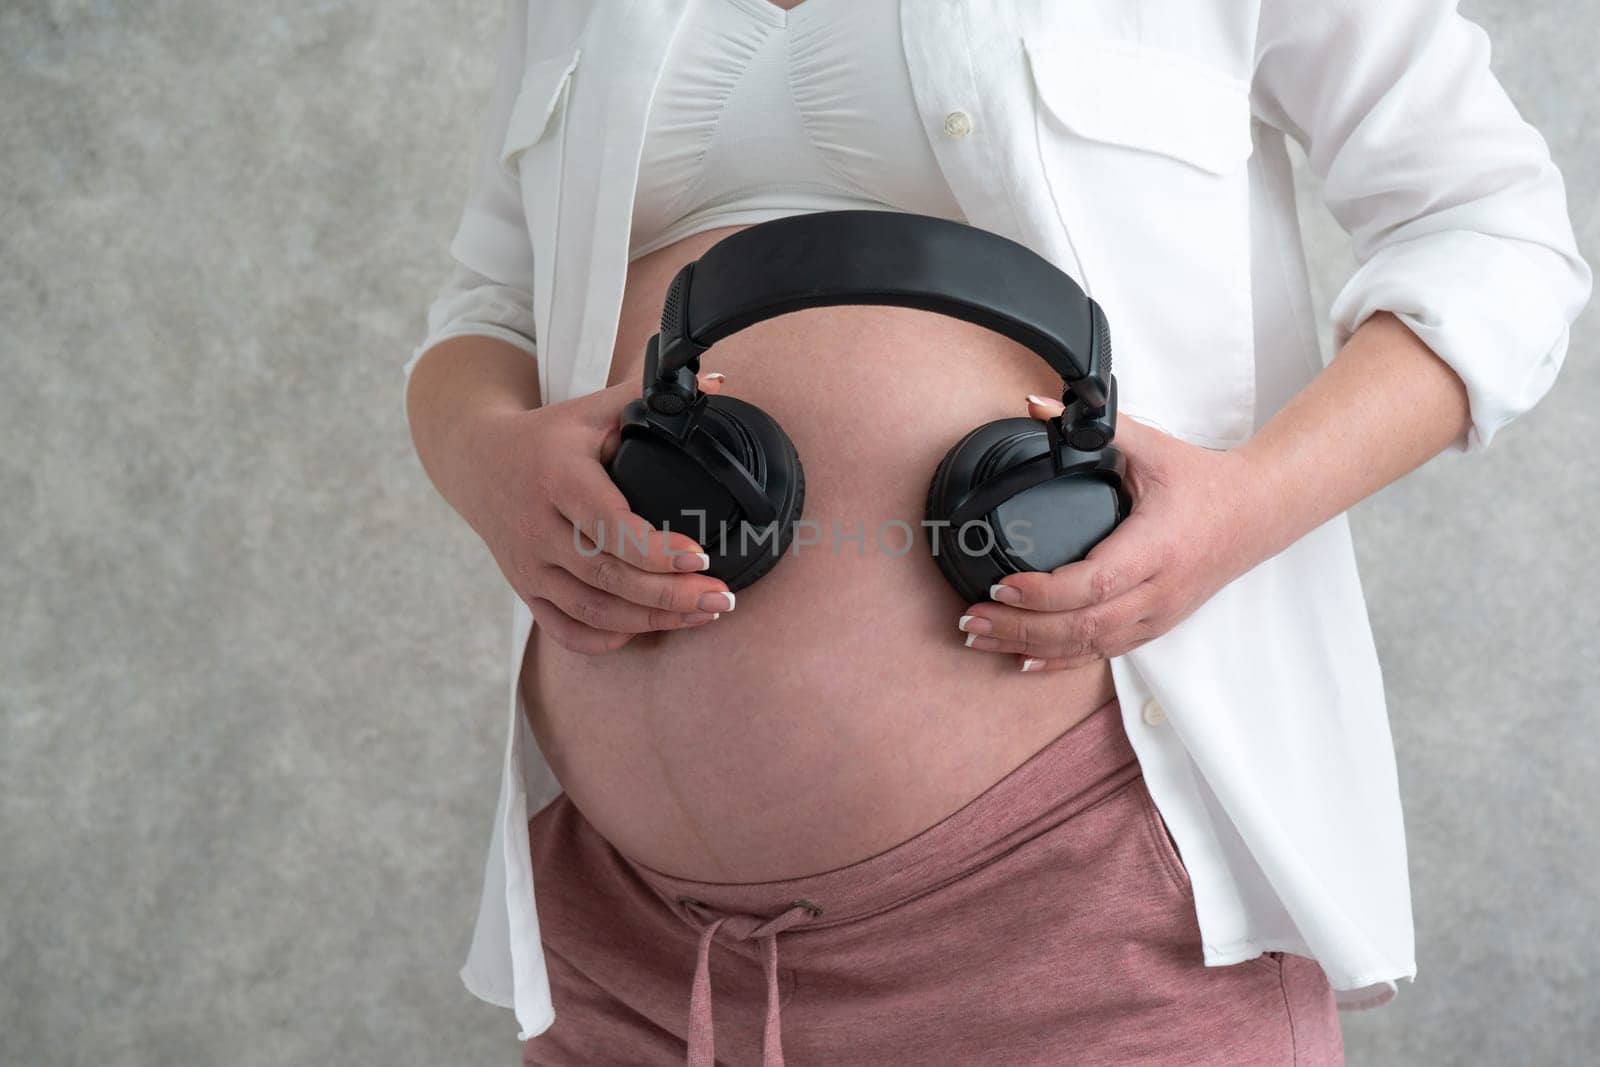 Pregnant woman putting headphones on her belly. Concept of listening music before birth by Mariakray